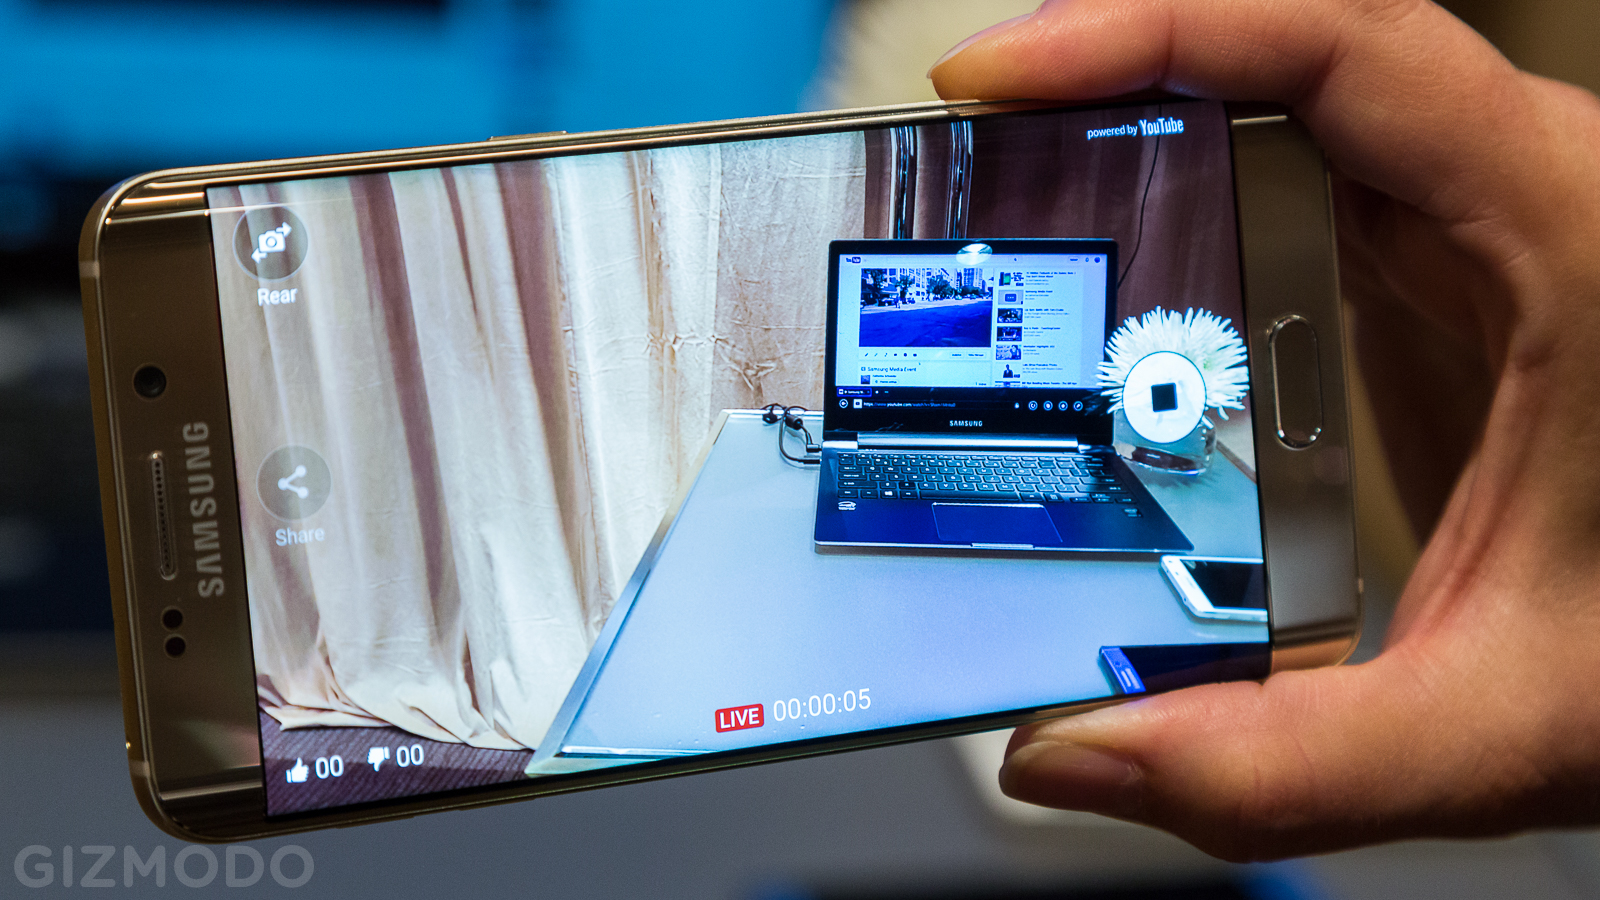 The Four Things You Need To Know About The New Galaxy Note 5